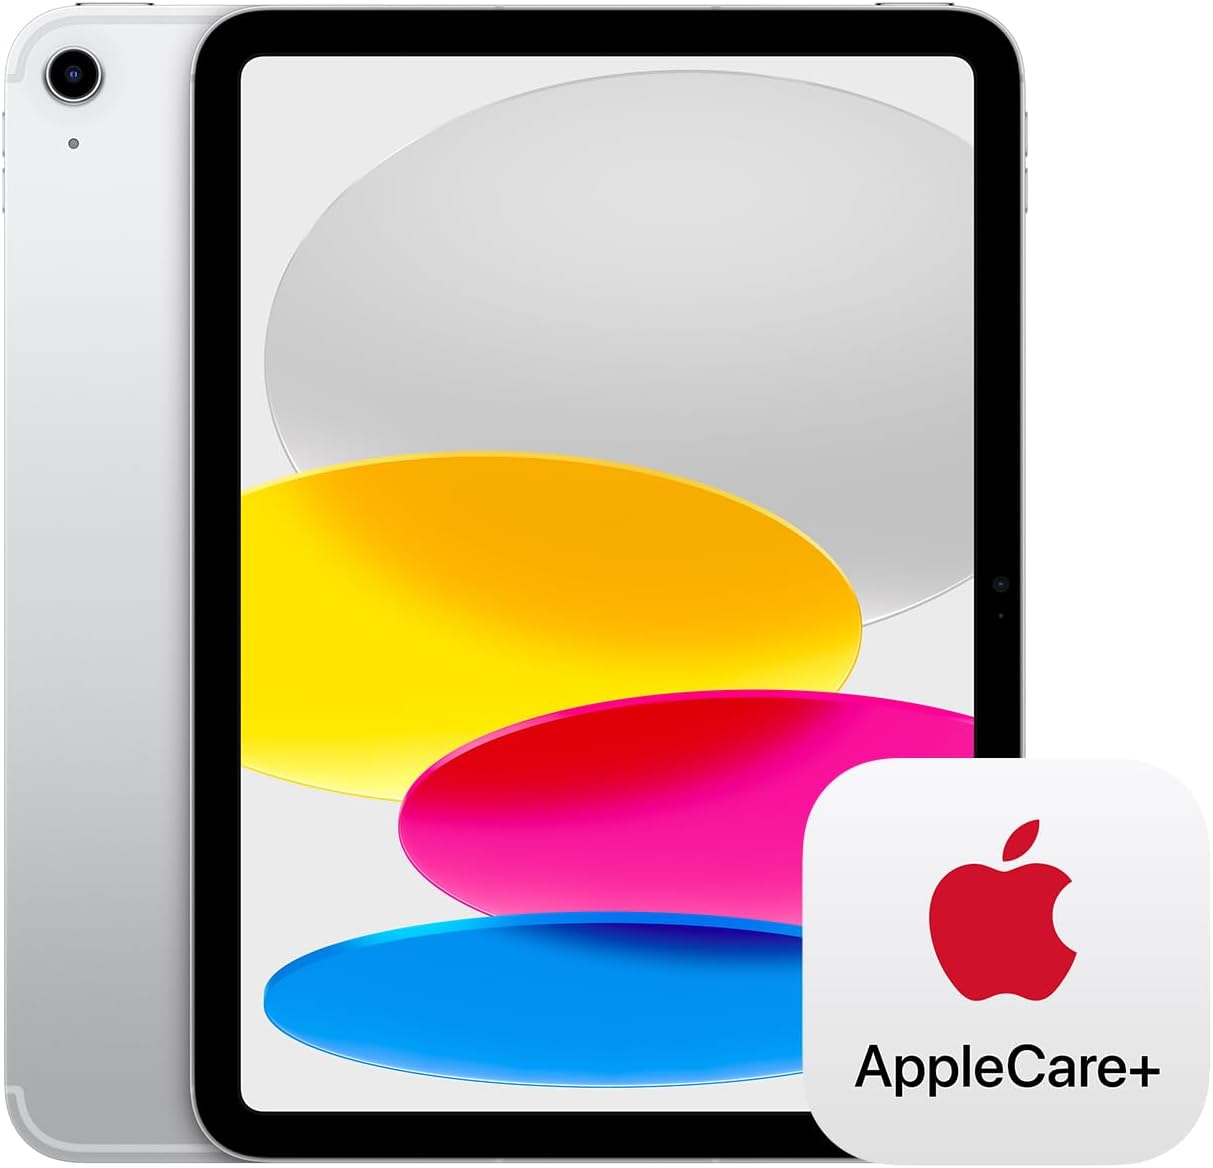 Apple iPad (10th Generation): with A14 Bionic chip, 10.9-inch Liquid Retina Display, 64GB, Wi-Fi 6, 12MP front/12MP Back Camera, Touch ID, All-Day Battery Life – Blue